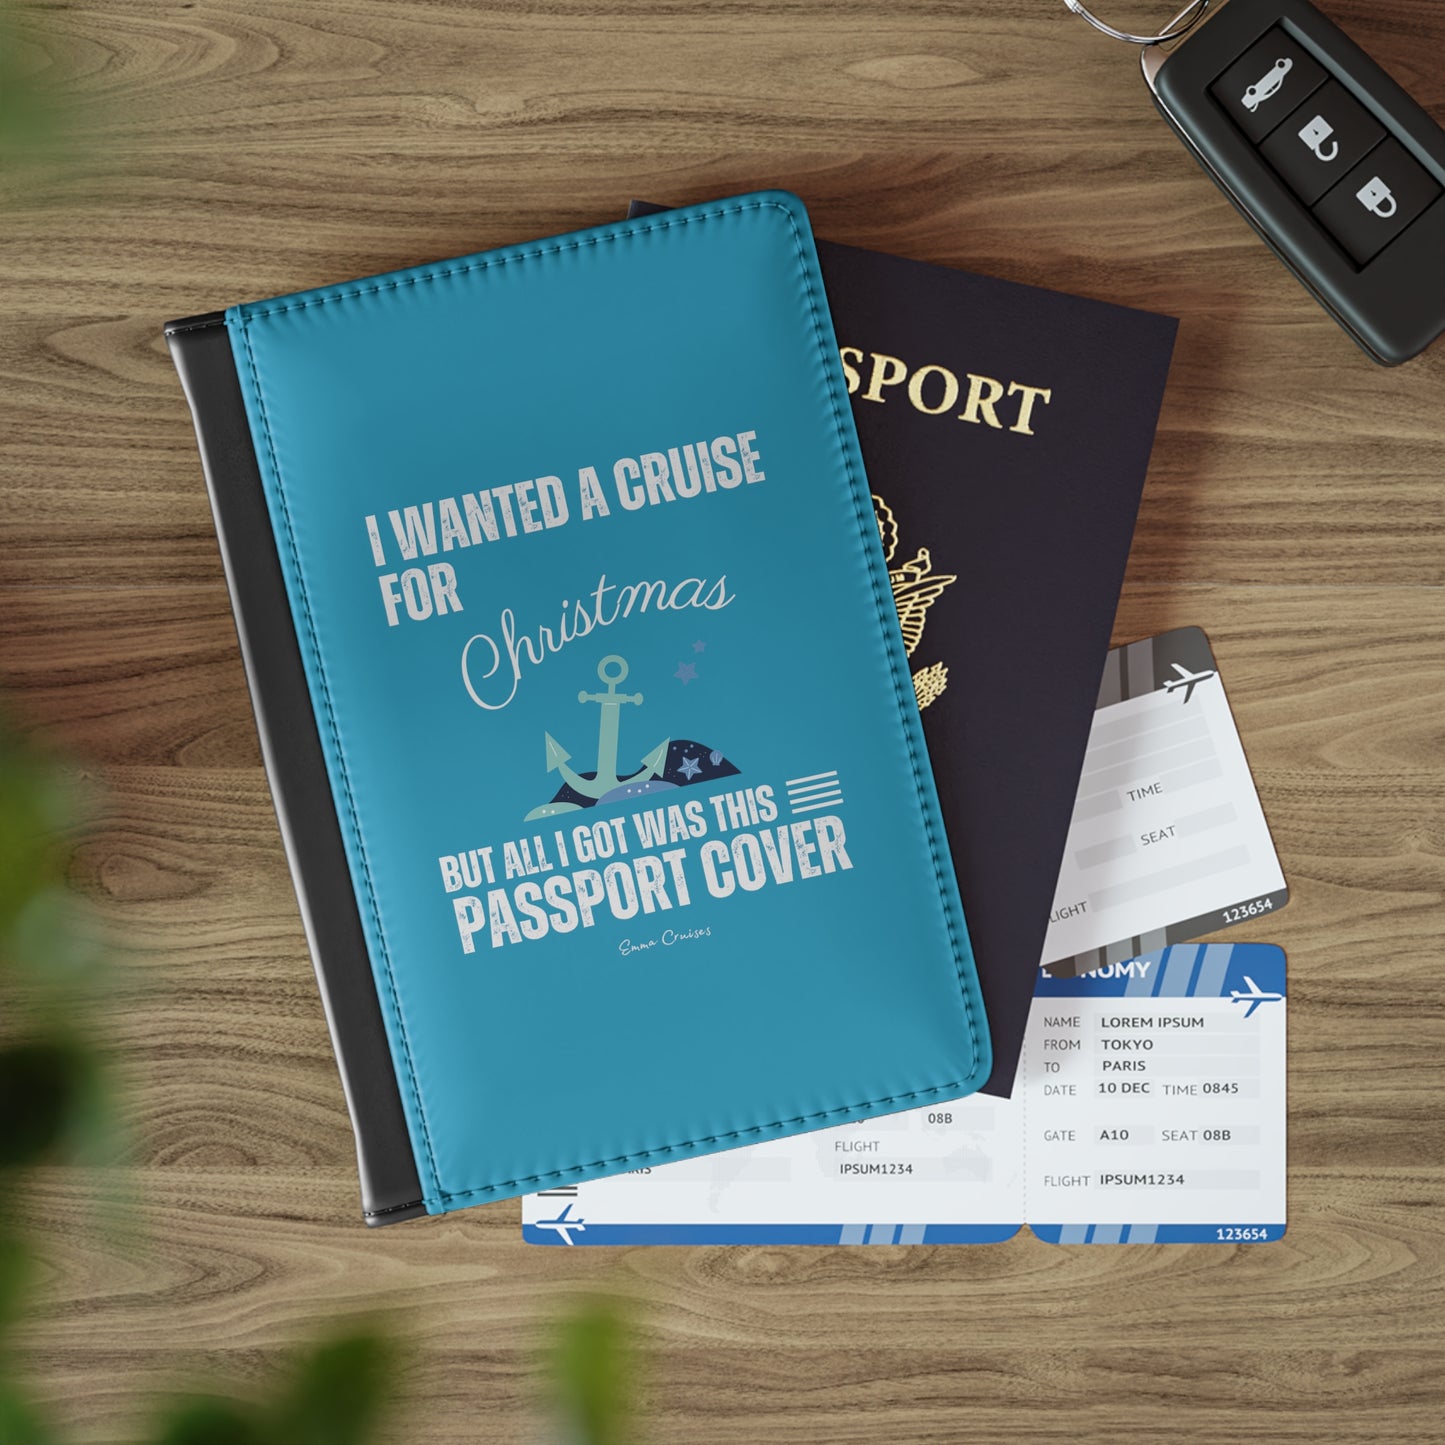 I Wanted a Cruise for Christmas - Passport Cover